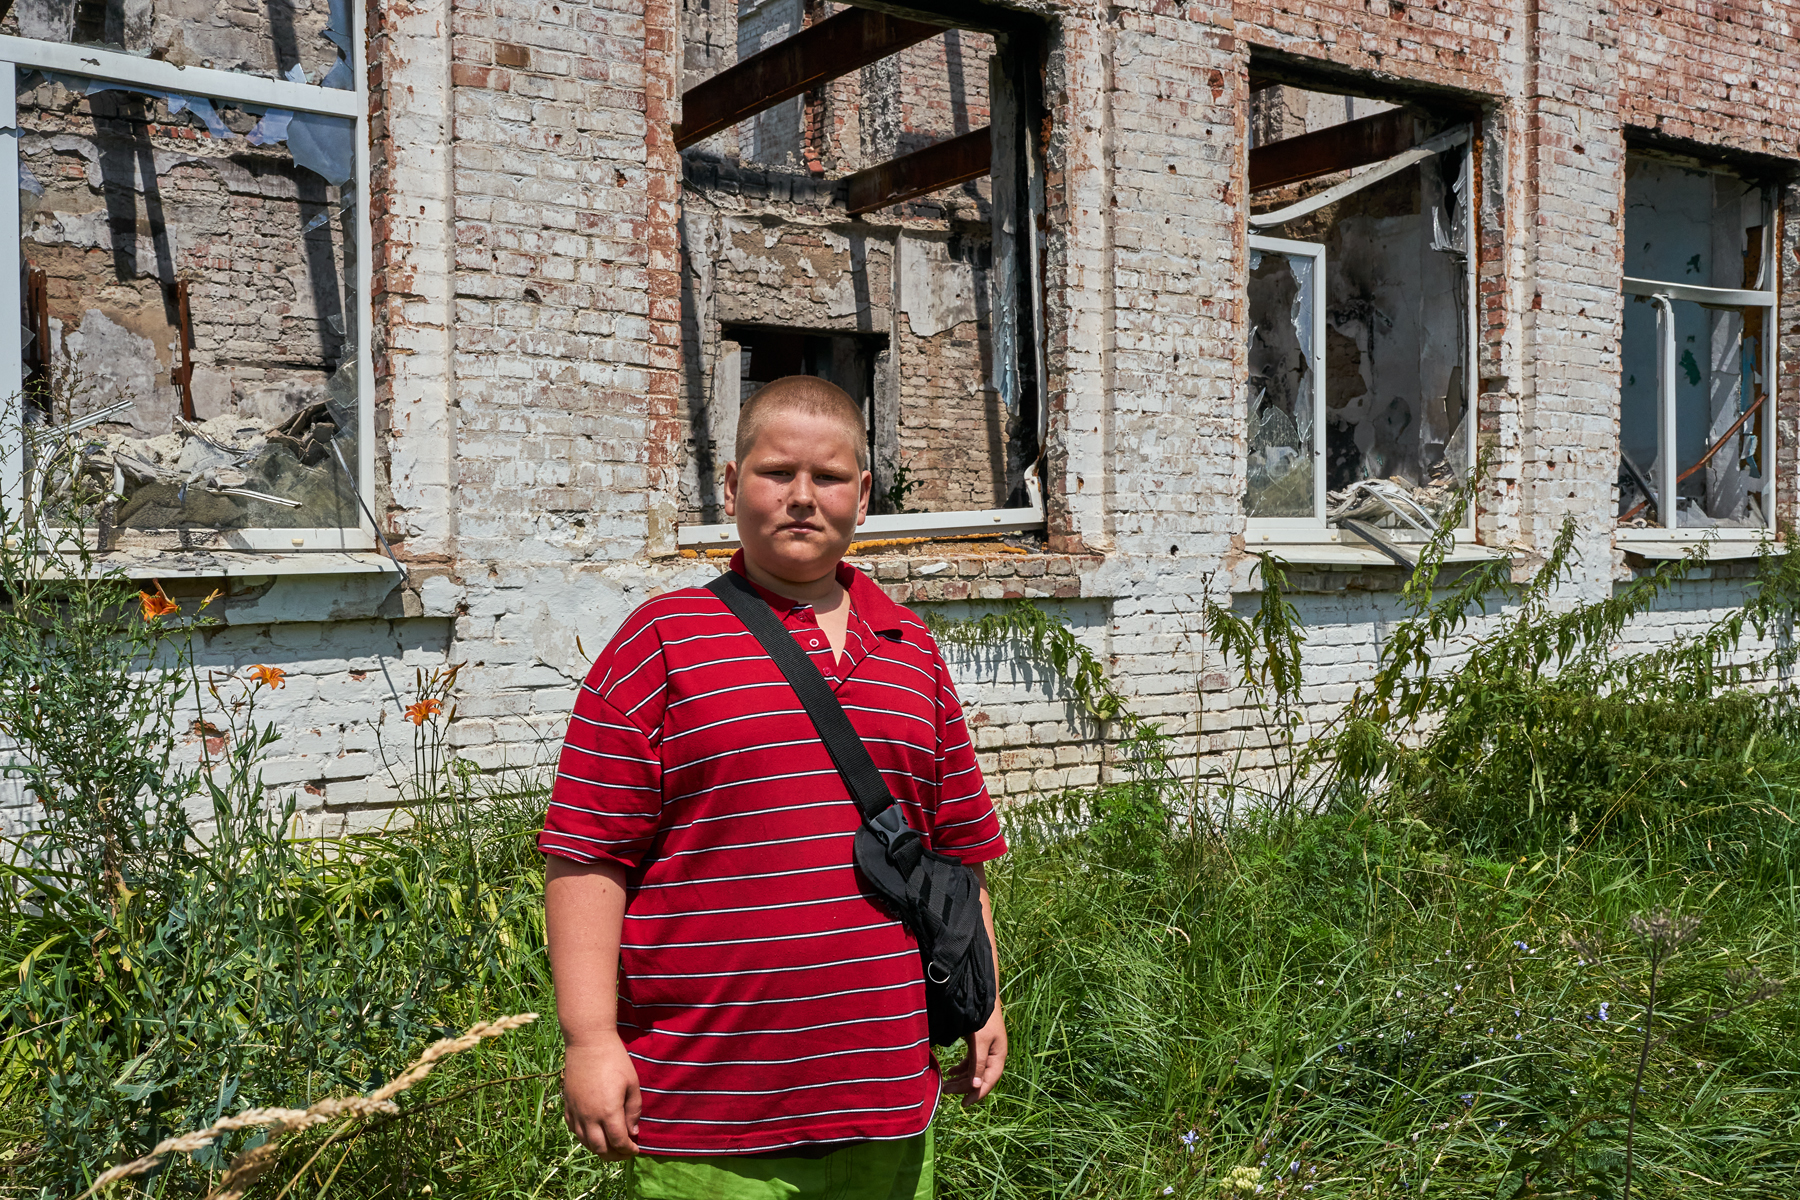 Seryozha poses for a photo in front of an elementary school in the village of Staryi Saltiv in Kharkiv region. The village was captured immediately after the start of the Russian full-scale invasion in February 2022 and was liberated in May 2022. "My family stayed during the occupation, but we were evacuated by the Red Cross a couple days after our village was liberated. When Russian soldiers retreated, when they left the village, they started to shell us. Therefore, we were evacuated to Dnipro". Seryozha used to go to this elementary school which has only four grades. He then continued to study in Lyceum located next to the elementary. "My family came back to our village two months ago". Seryozha likes to play soccer. He thinks school will continue only on-line. He does not have a laptop and he uses his Wi-Fi on his phone. 